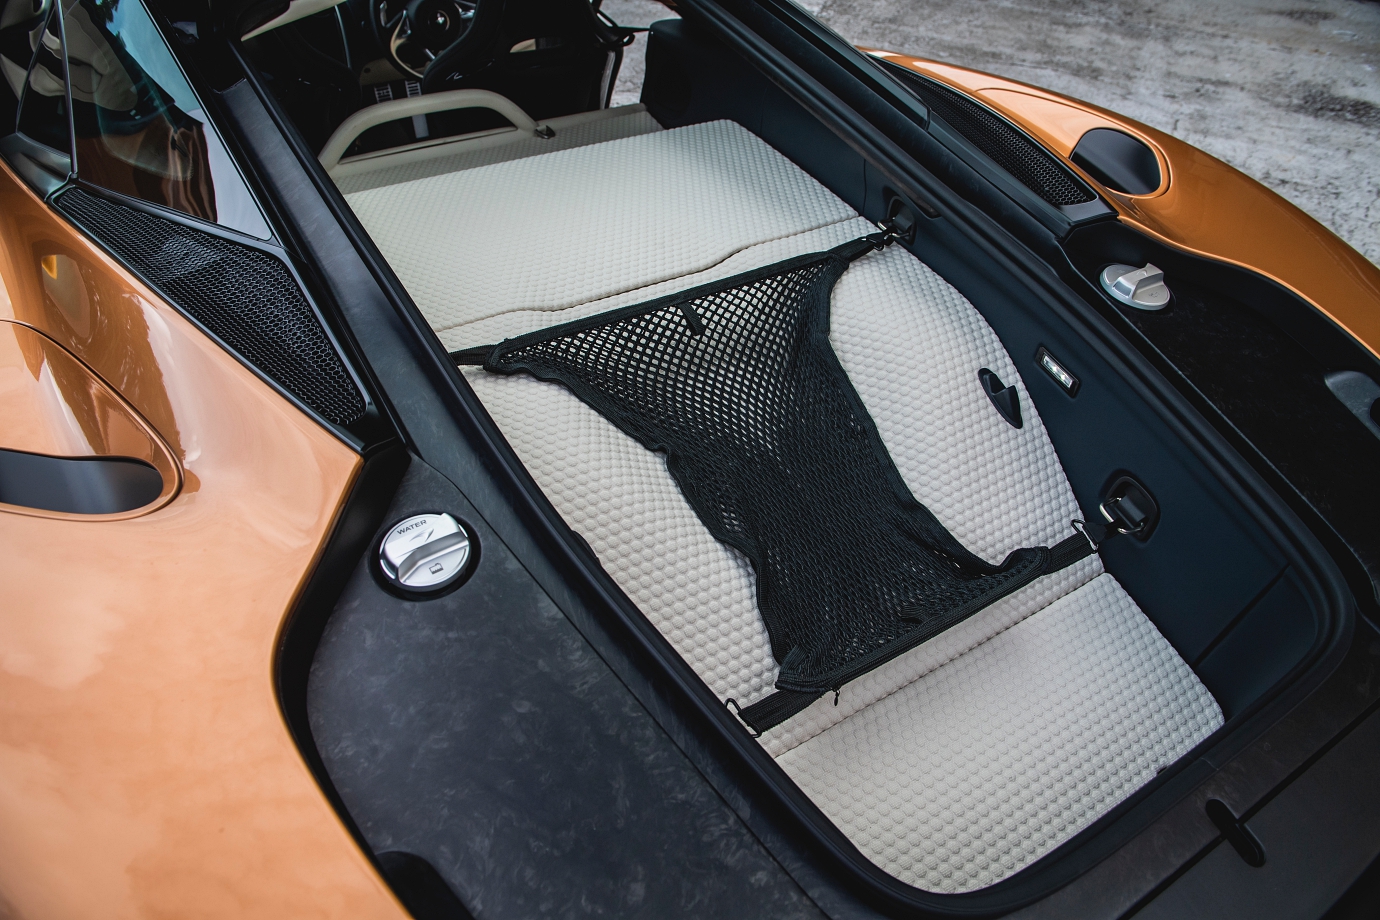 Up to 420-litres of storage capacity. Note carbonfibre frame for added rigidity